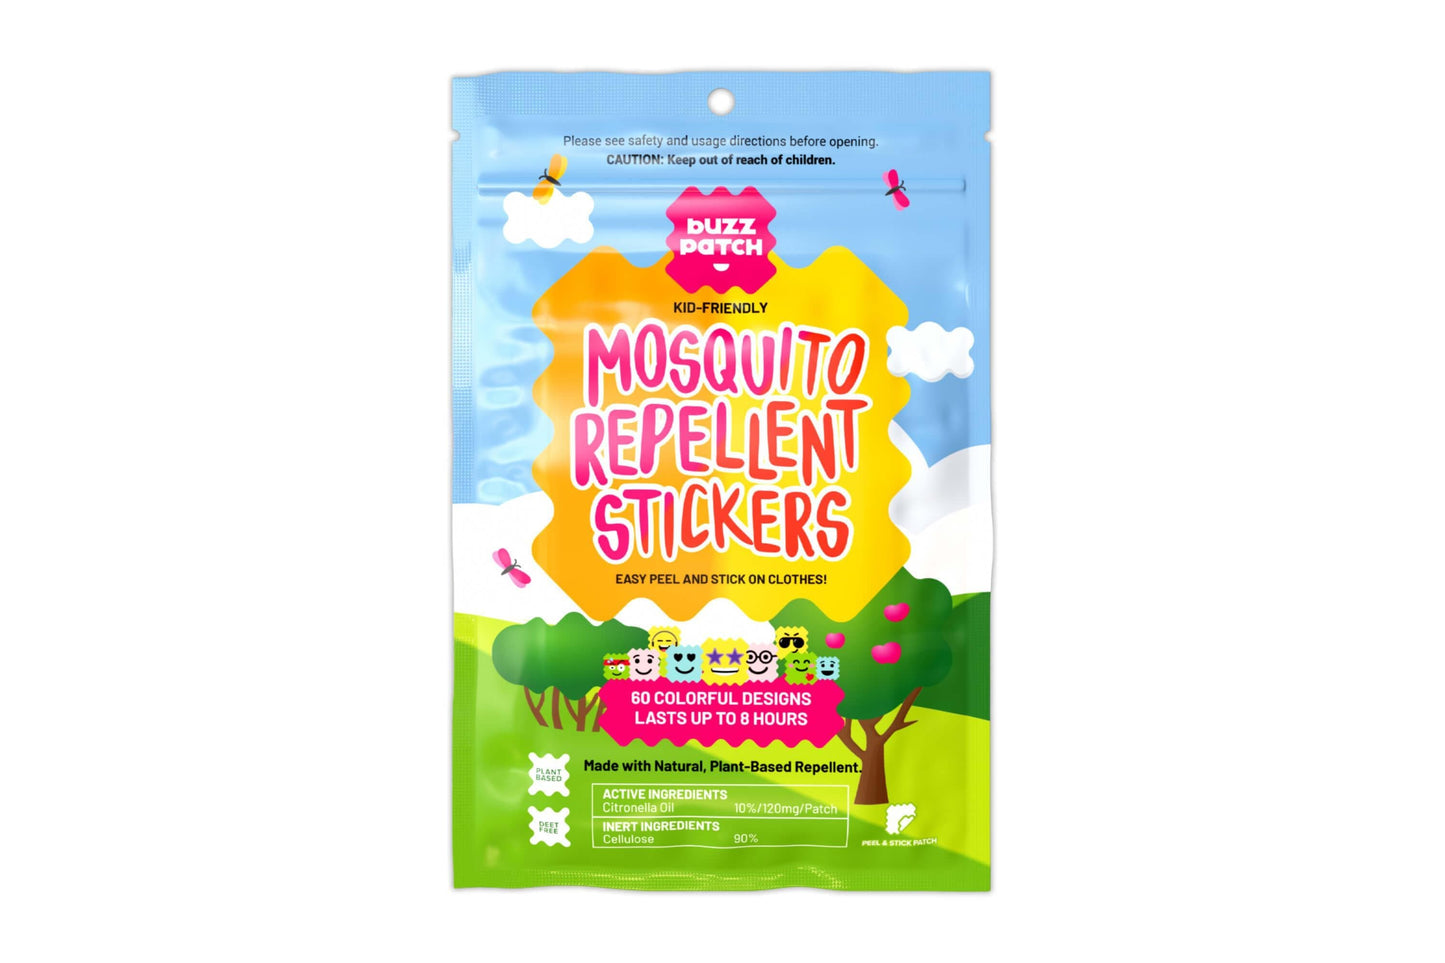 *BuzzPatch Mosquito Repellent Patches